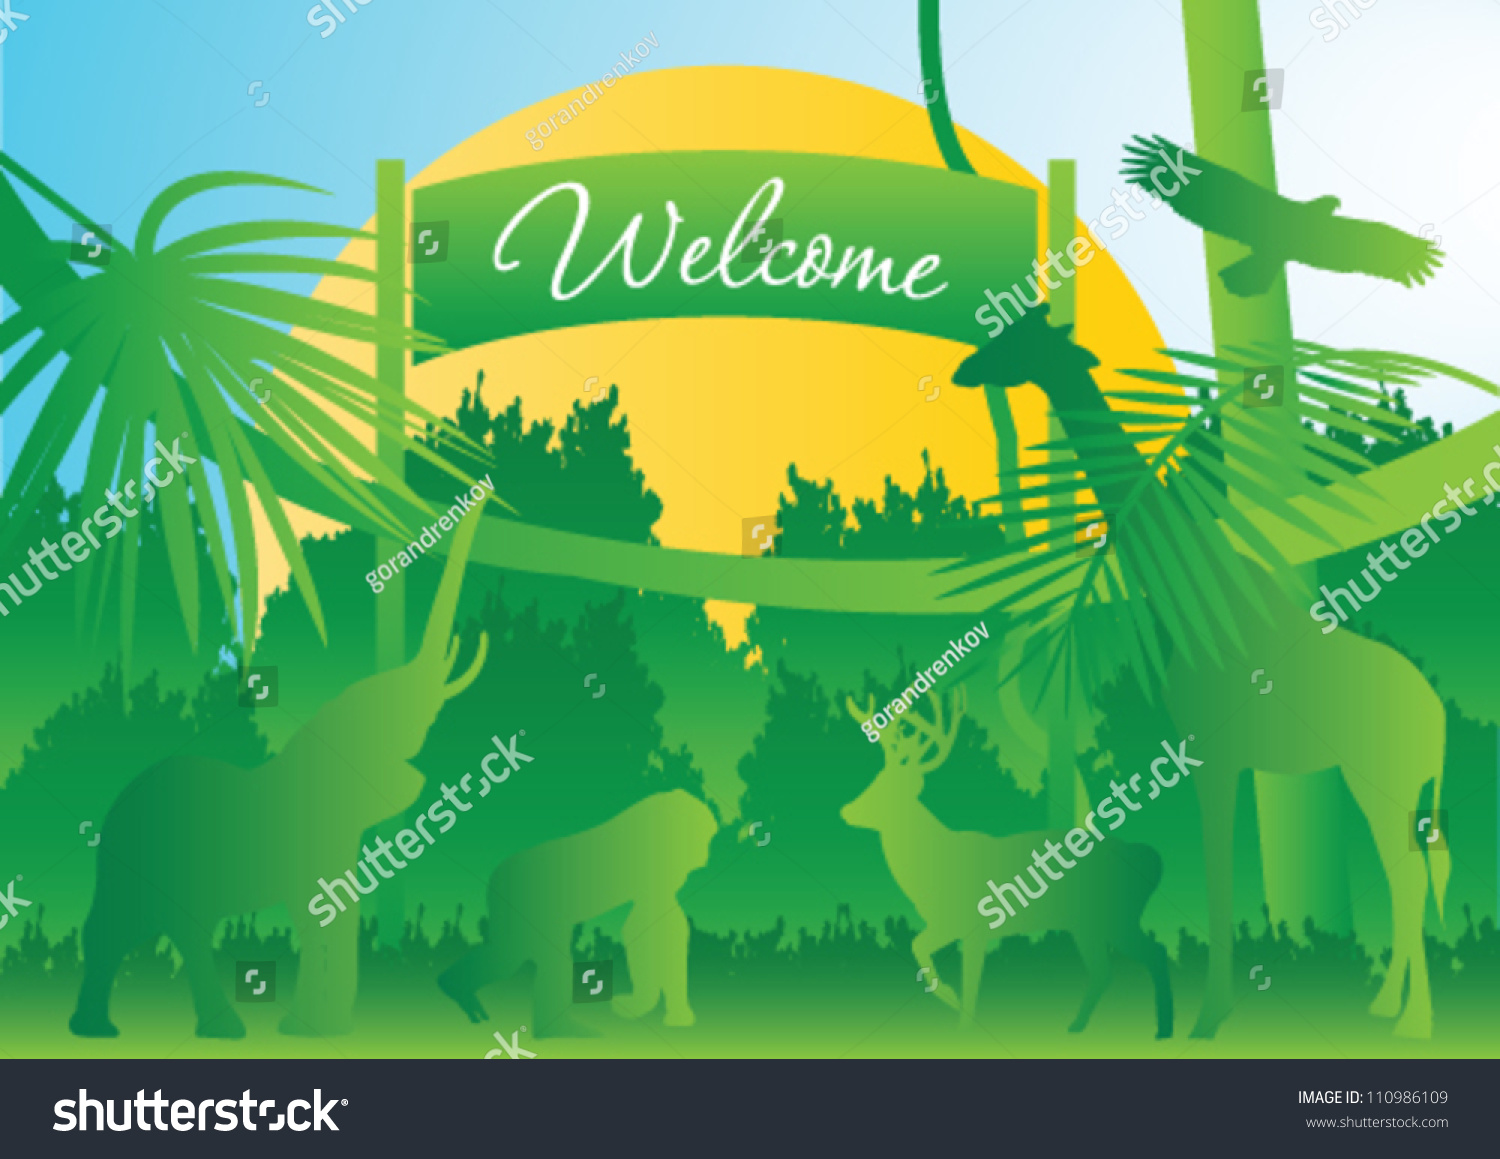 zoo background clipart - photo #32